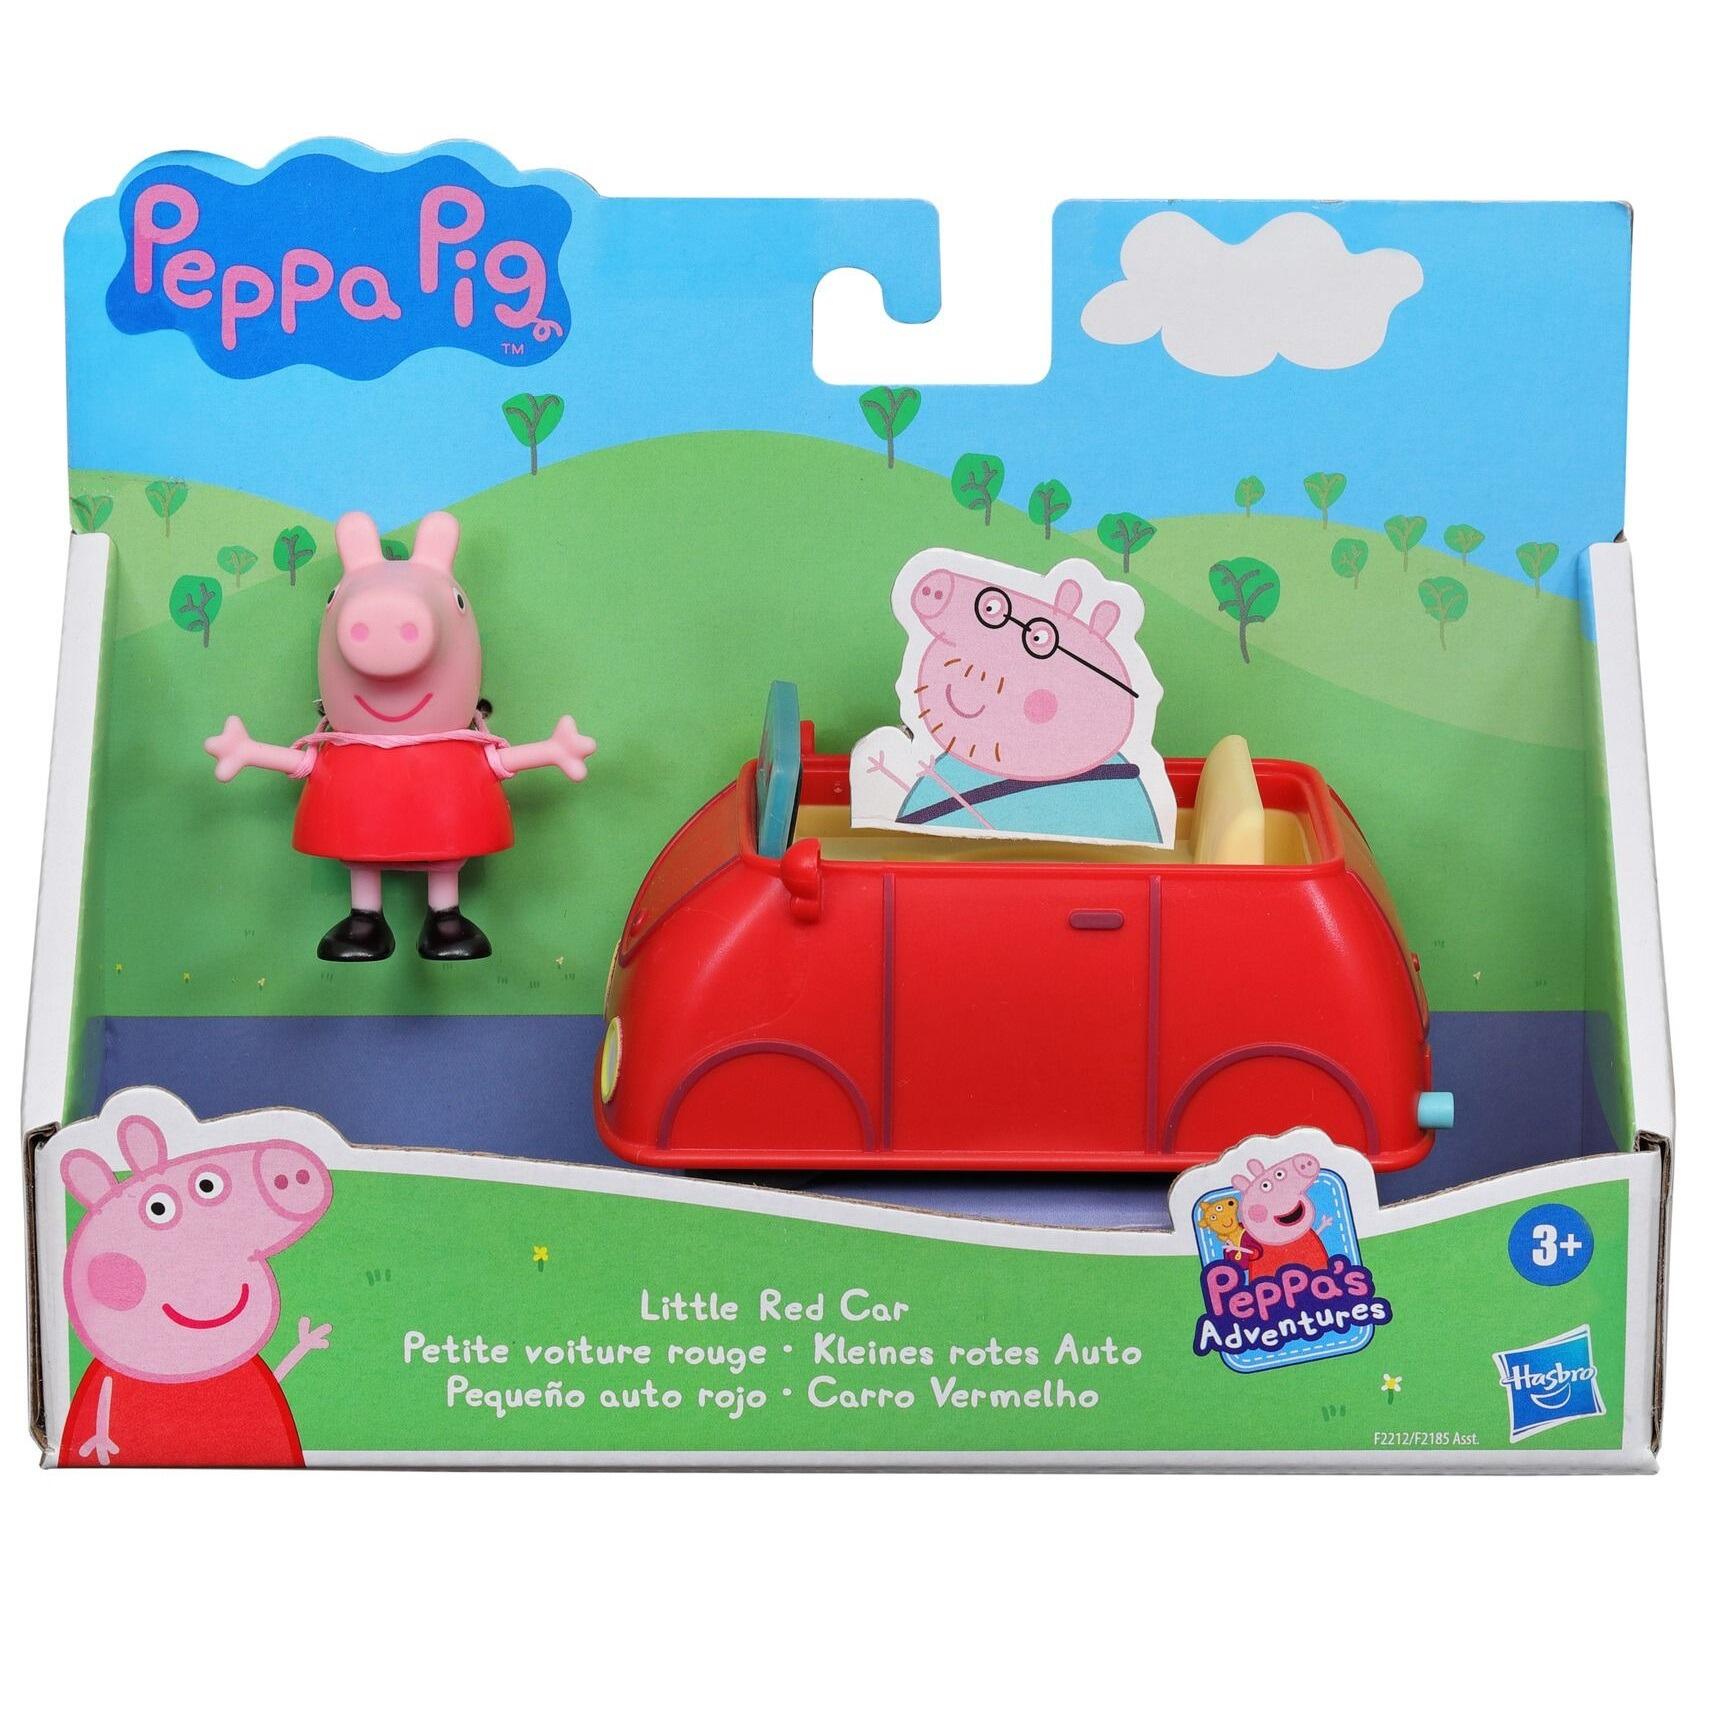 Peppa Pig Vehicles Little Red Car